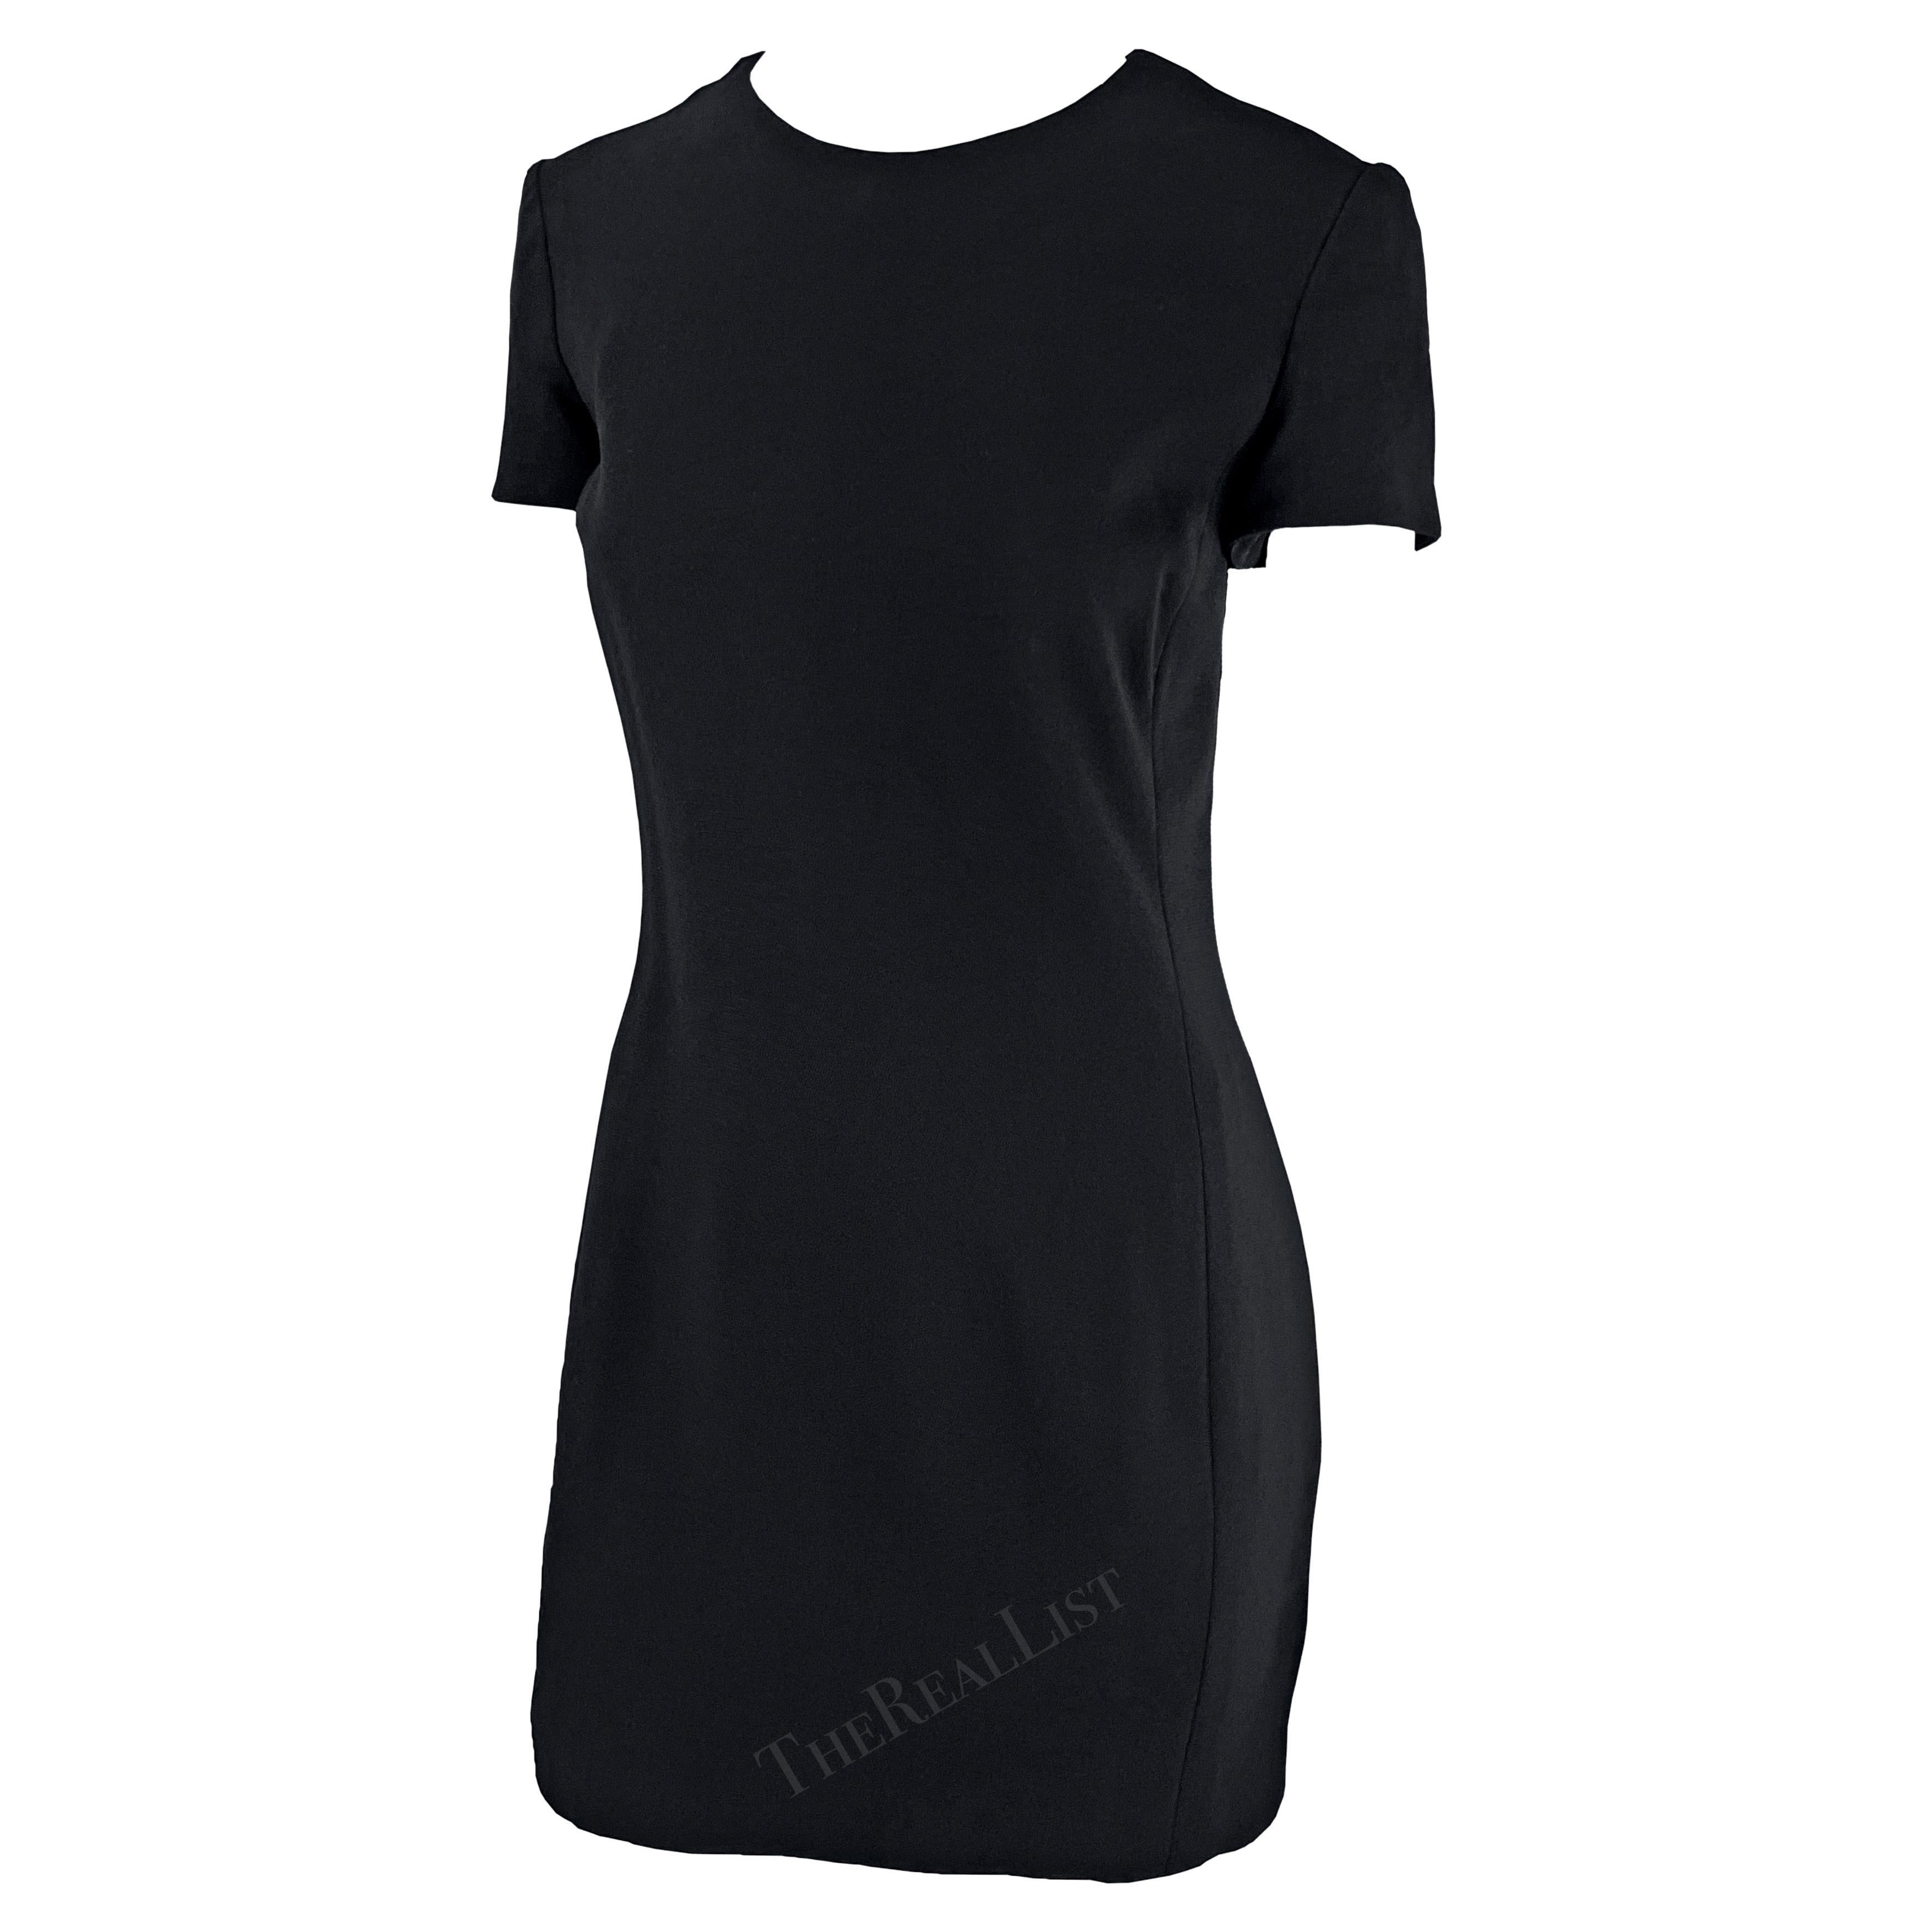 Presenting the perfect Gianni Versace little black dress, designed by Gianni Versace. From the Fall/Winter 1996 collection, this perfectly fitted mini dress features a tapered cut, short sleeves, and a crew neckline. Effortlessly chic and timeless,